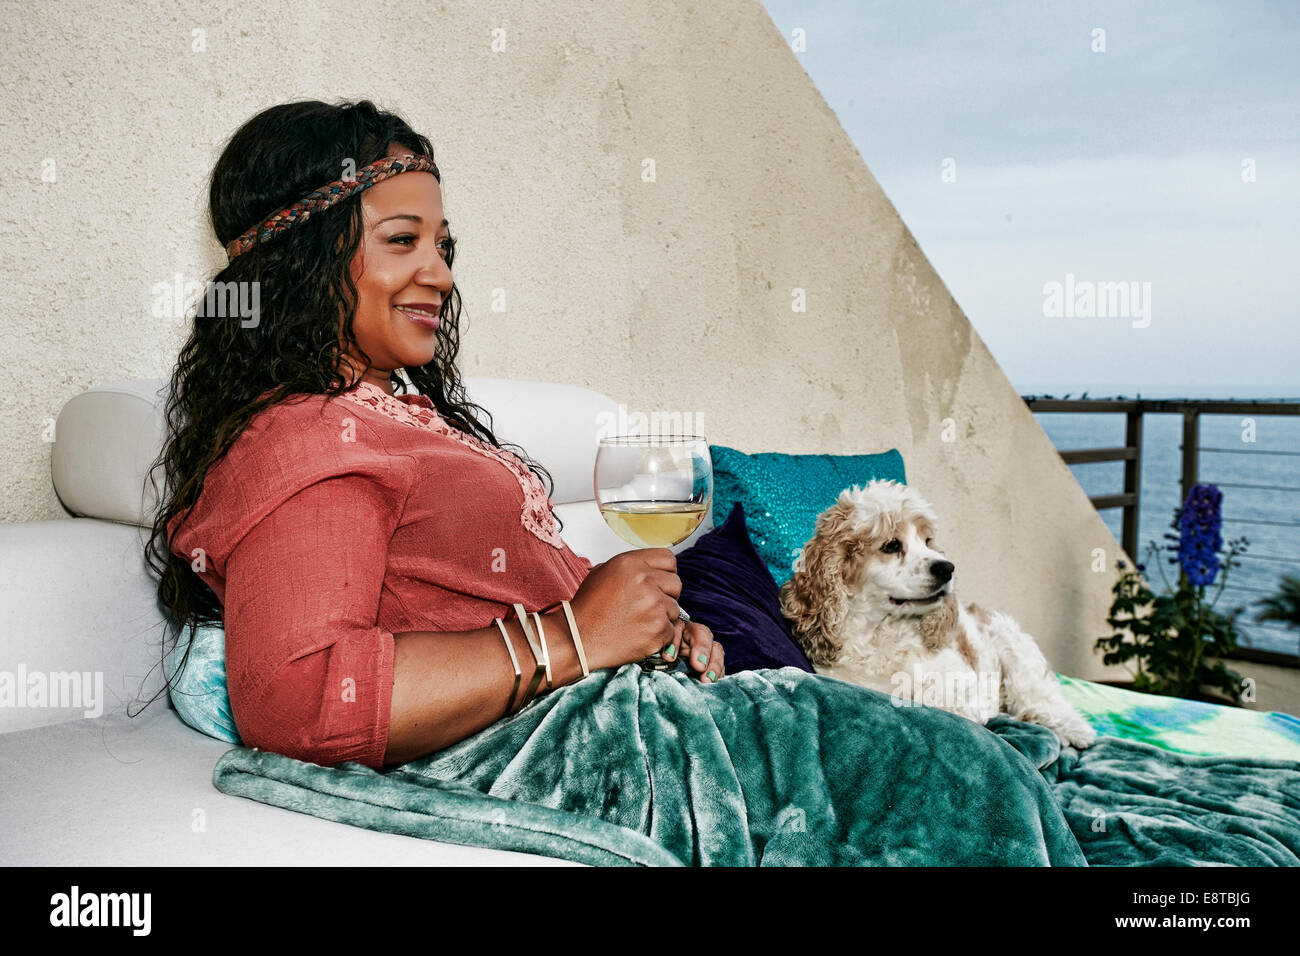 Mixed Race woman drinking wine at waterfront avec chien Banque D'Images